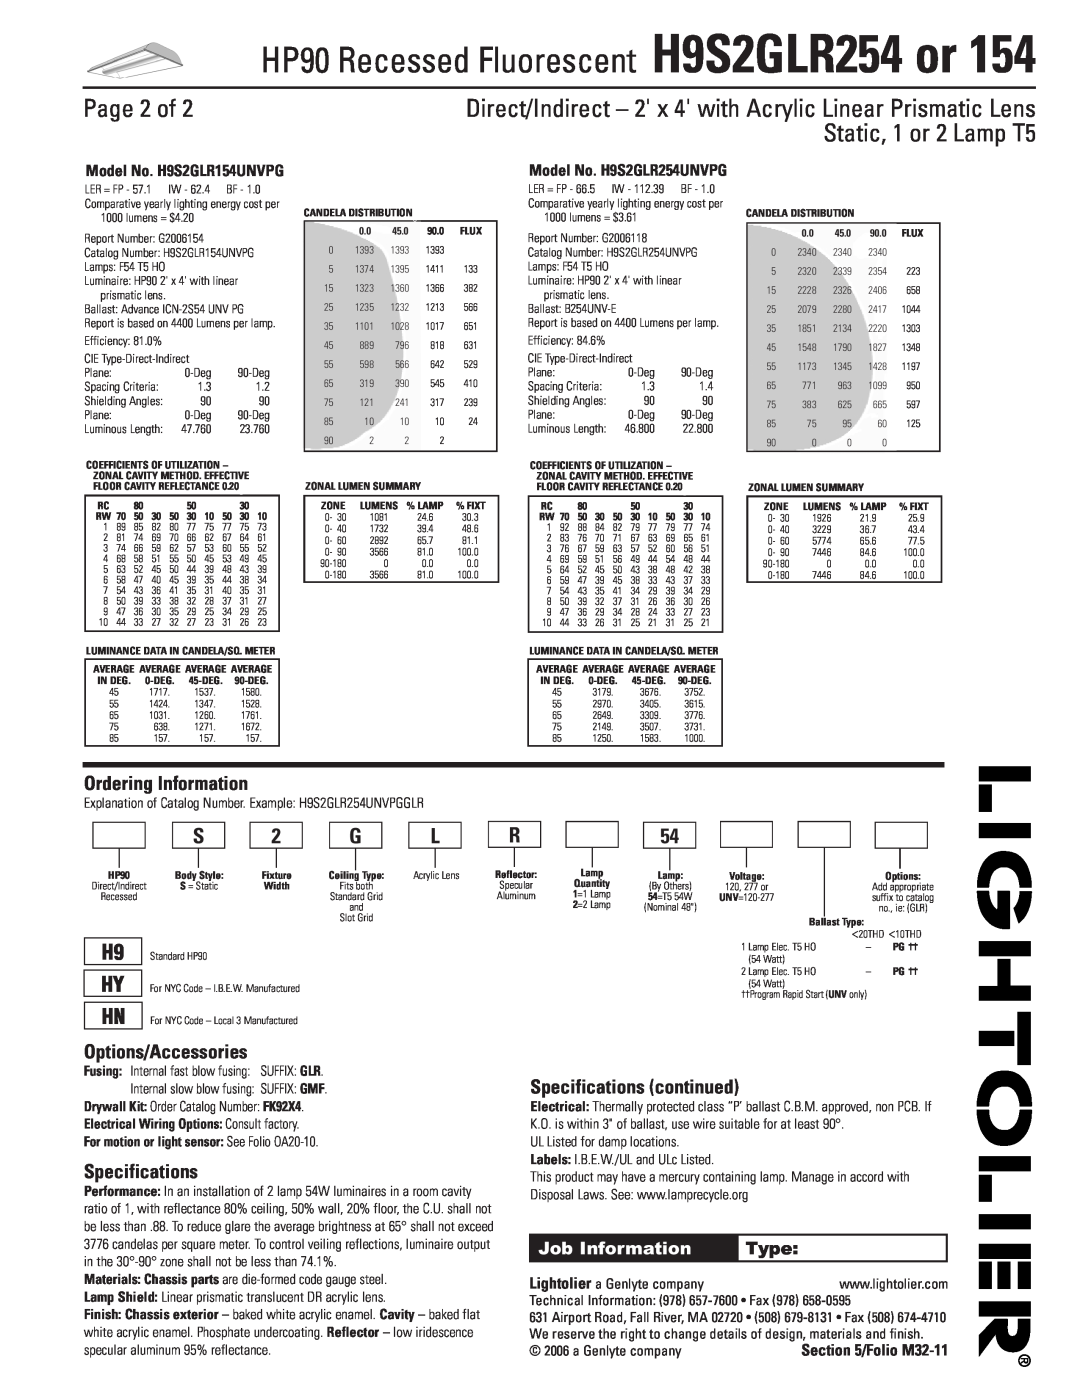 Lightolier HP90 Page 2 of, Ordering Information, Options/Accessories, Specifications continued, Static, 1 or 2 Lamp T5 